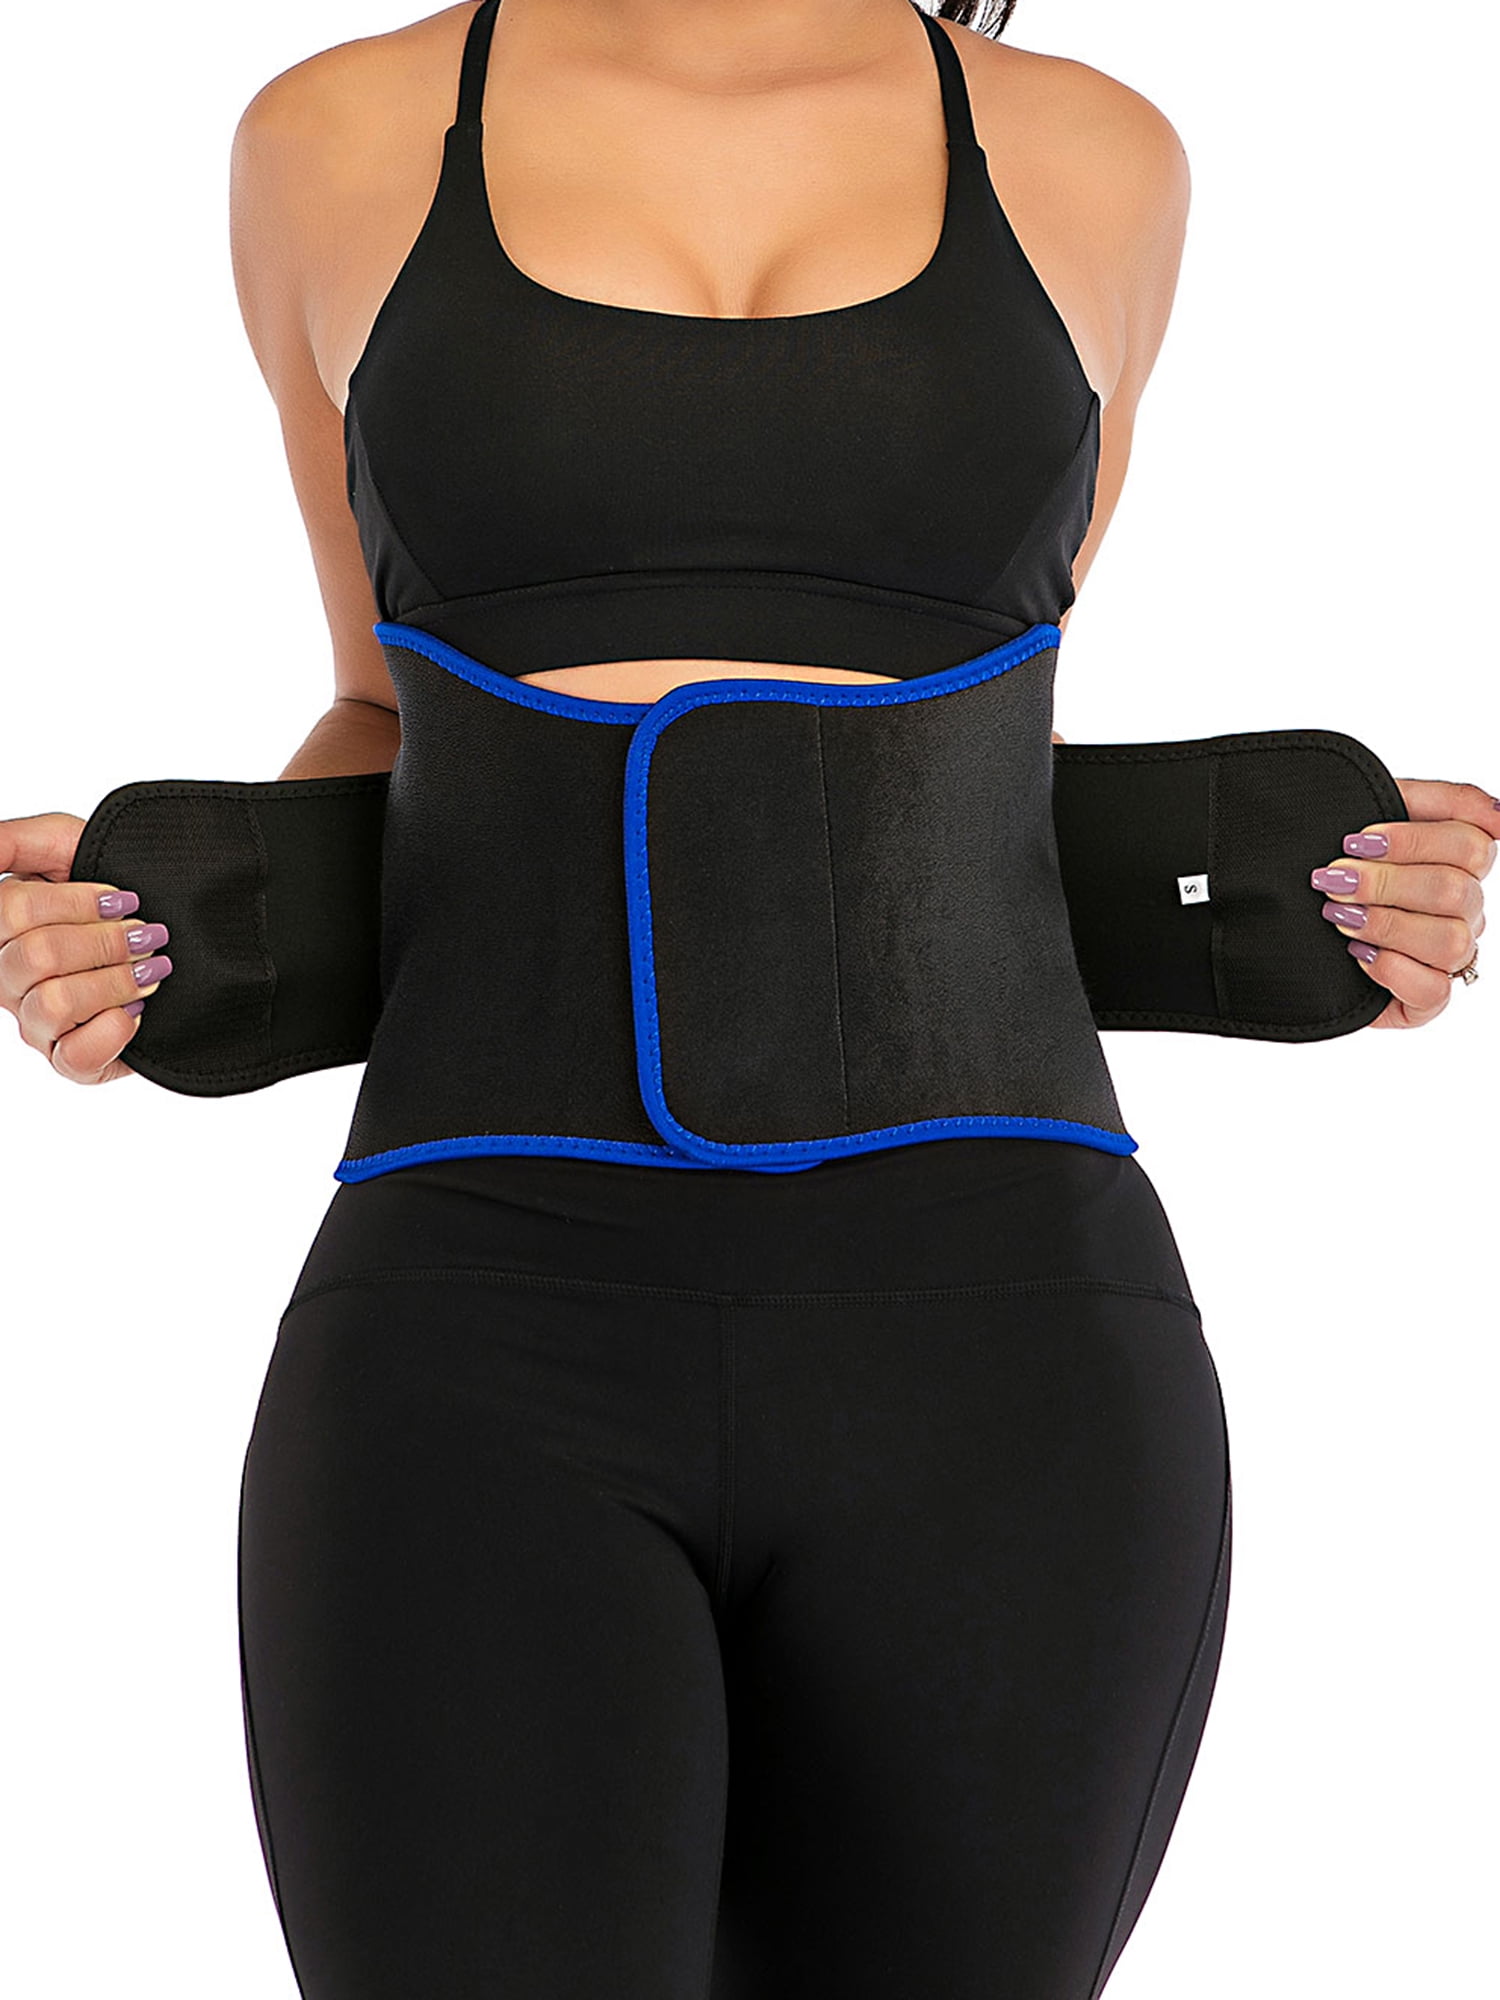 Details about   Sauna Waist Trainers Quick Weight Loss Trimmer Kit Waste Cincher Tummy Control 